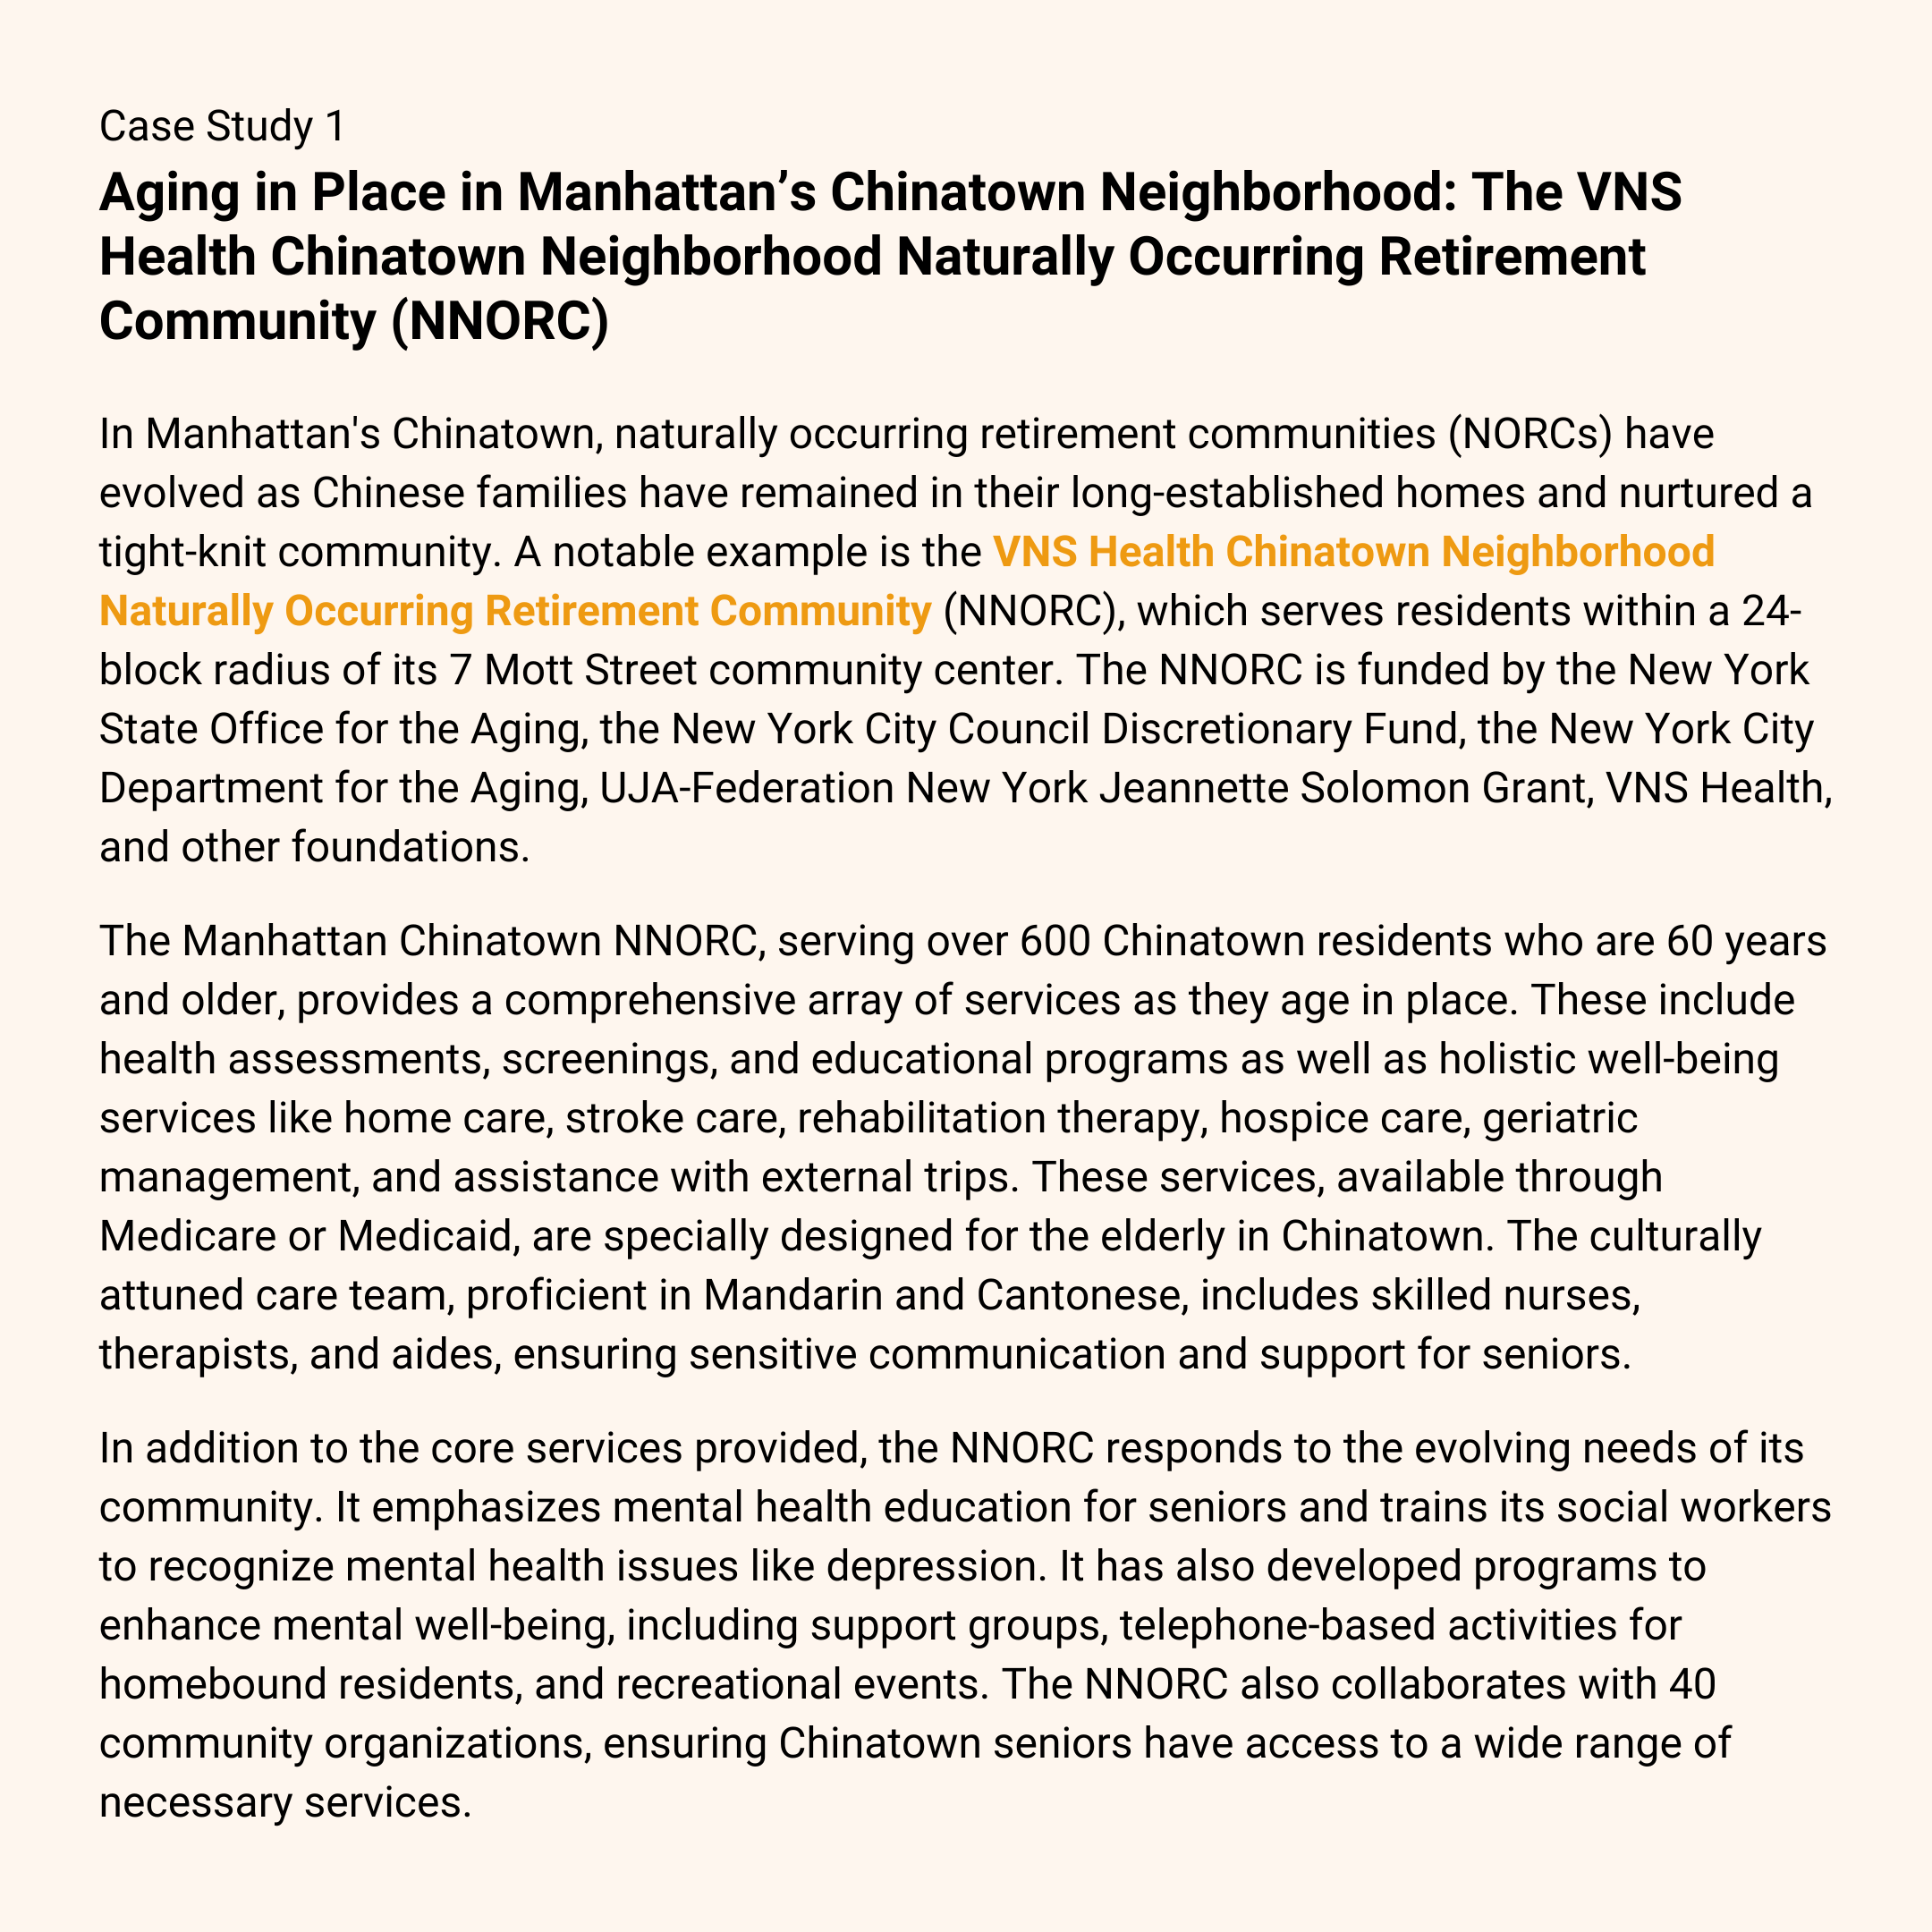 Case Study 1: Aging in Place in Manhattan's Chinatown Neighborhood: The VNS Health Chinatown Neighborhood Naturally Occurring Retirement Community (NNORC)